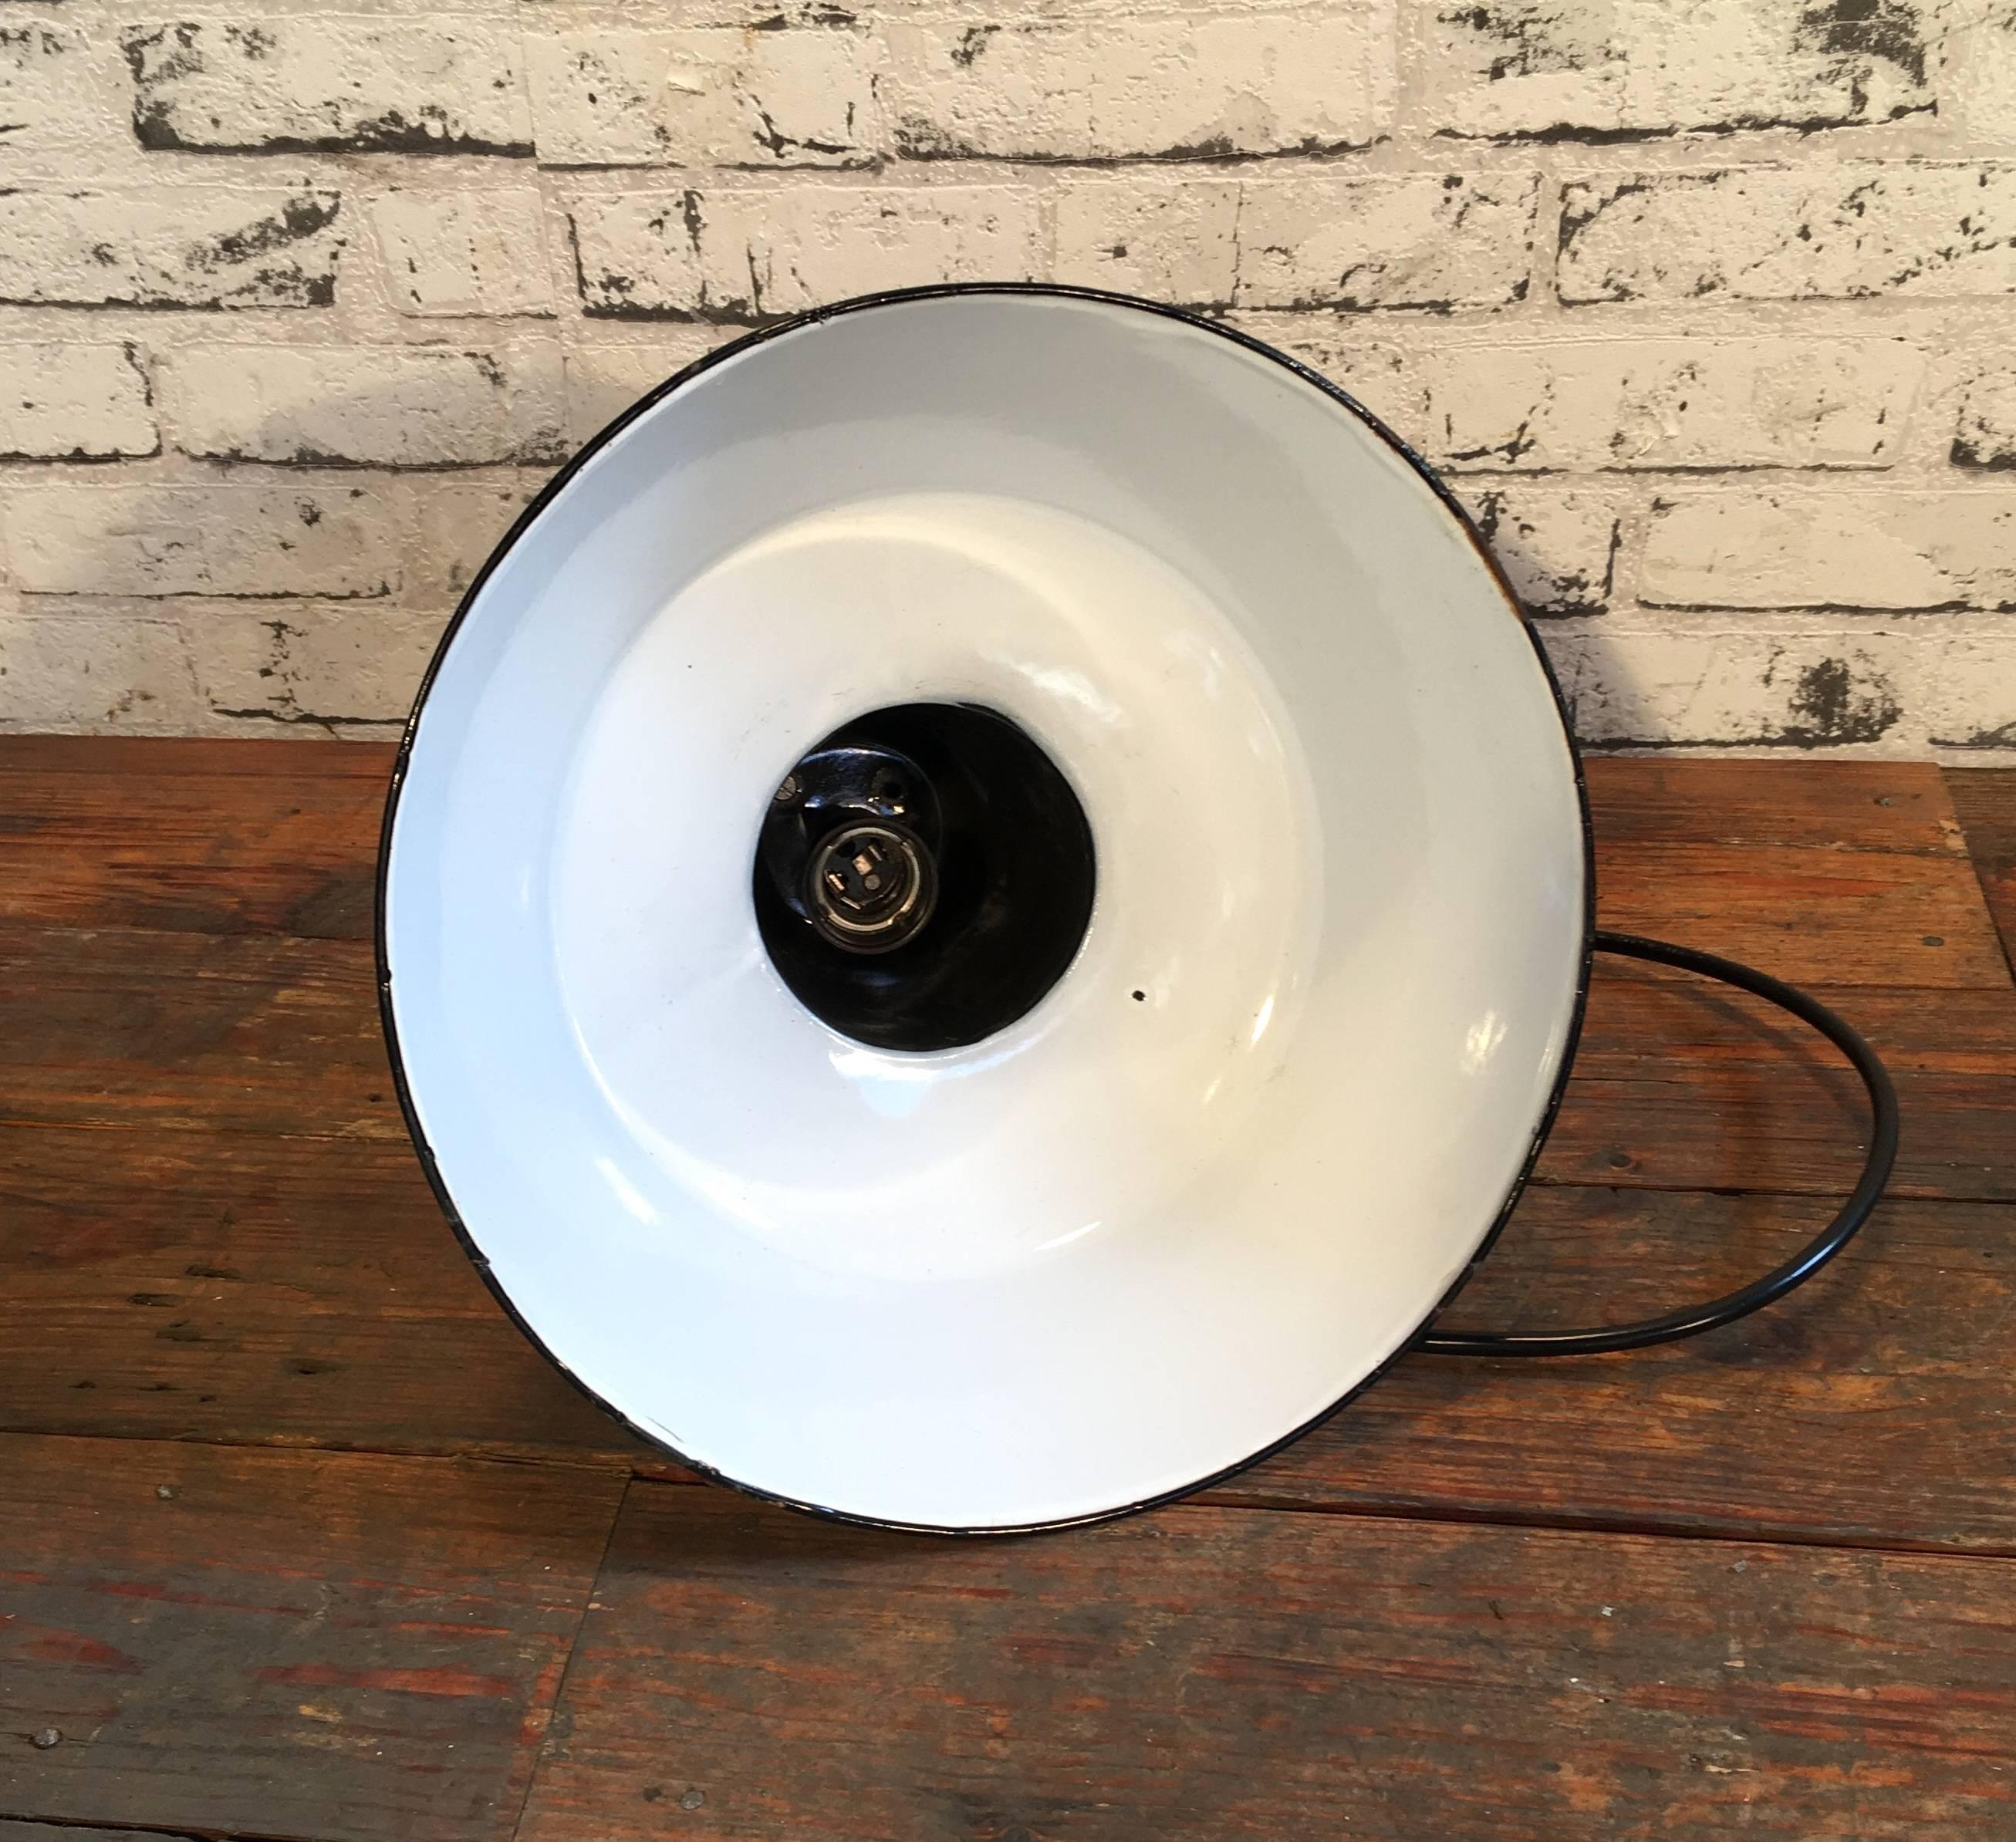 Pendant lamp in bauhaus style from former Czechoslovakia, previously used in a factories.
Made from enameled metal. Black outside, white interior. Cast iron top.
New porcelain socket for  E27 lightbulbs and wire. Weight 1.5 kg.